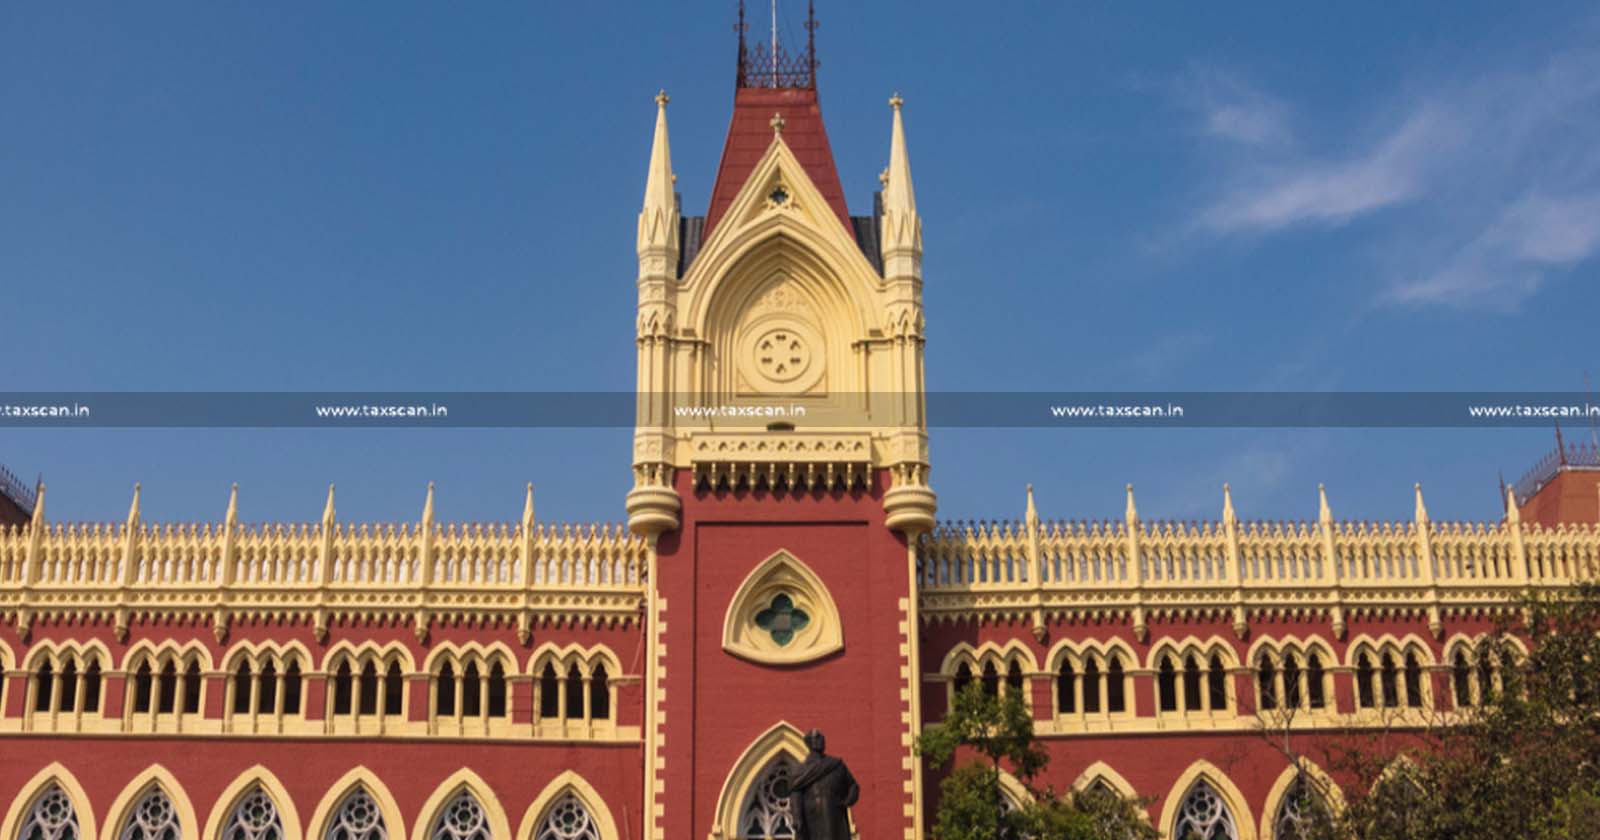 Calcutta high court - Business activity and share premium investment - business activities - TAXSCAN